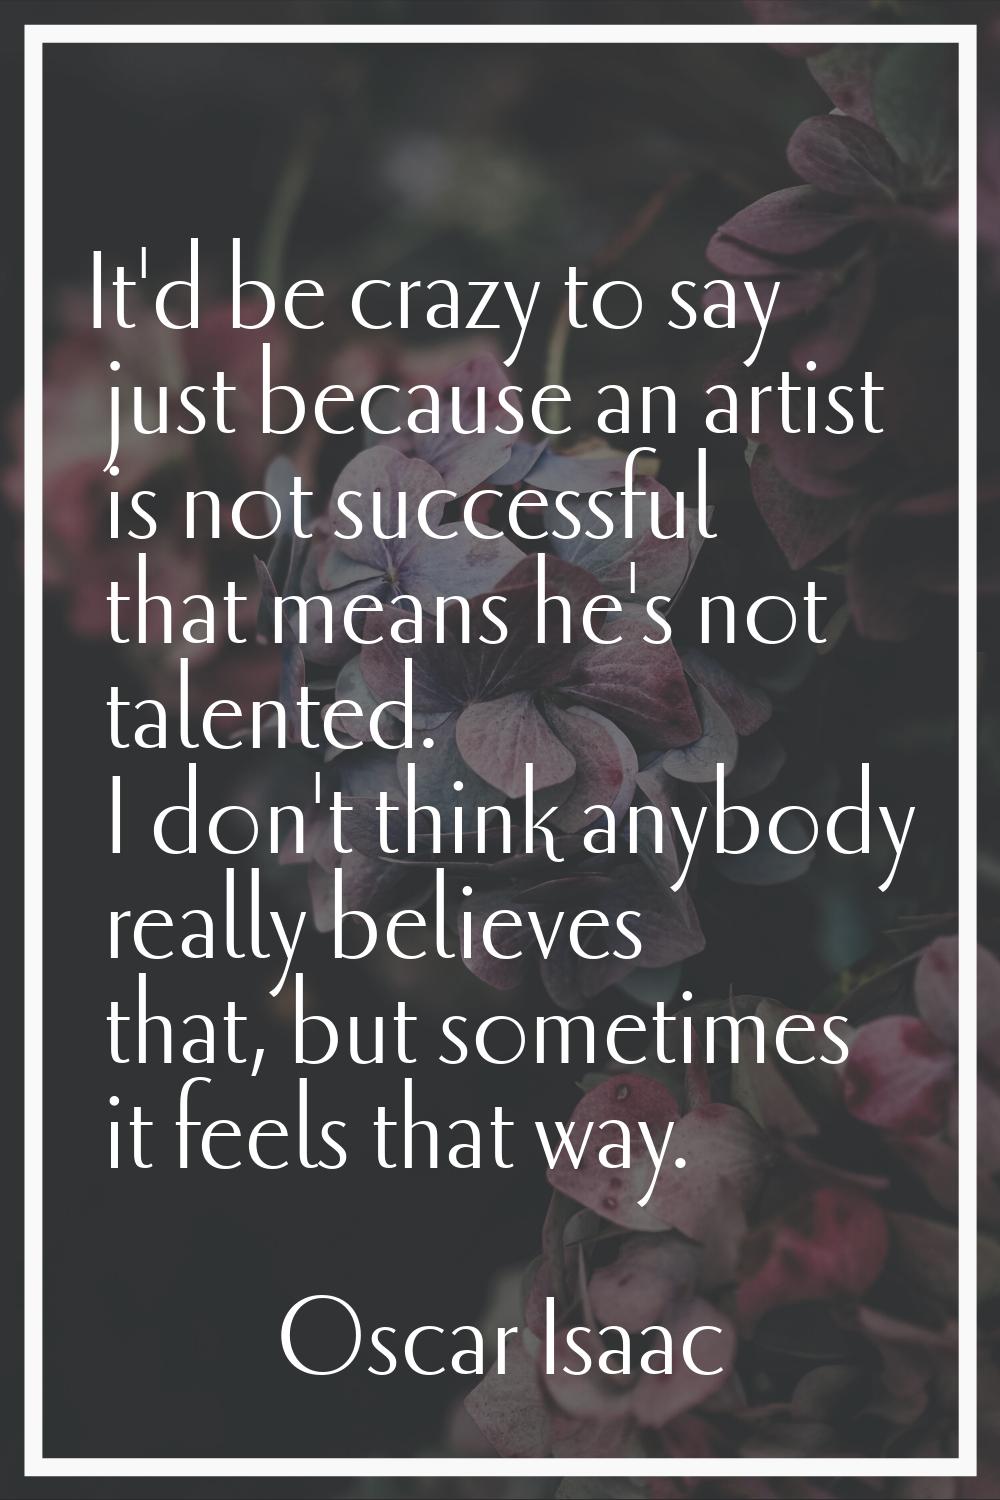 It'd be crazy to say just because an artist is not successful that means he's not talented. I don't